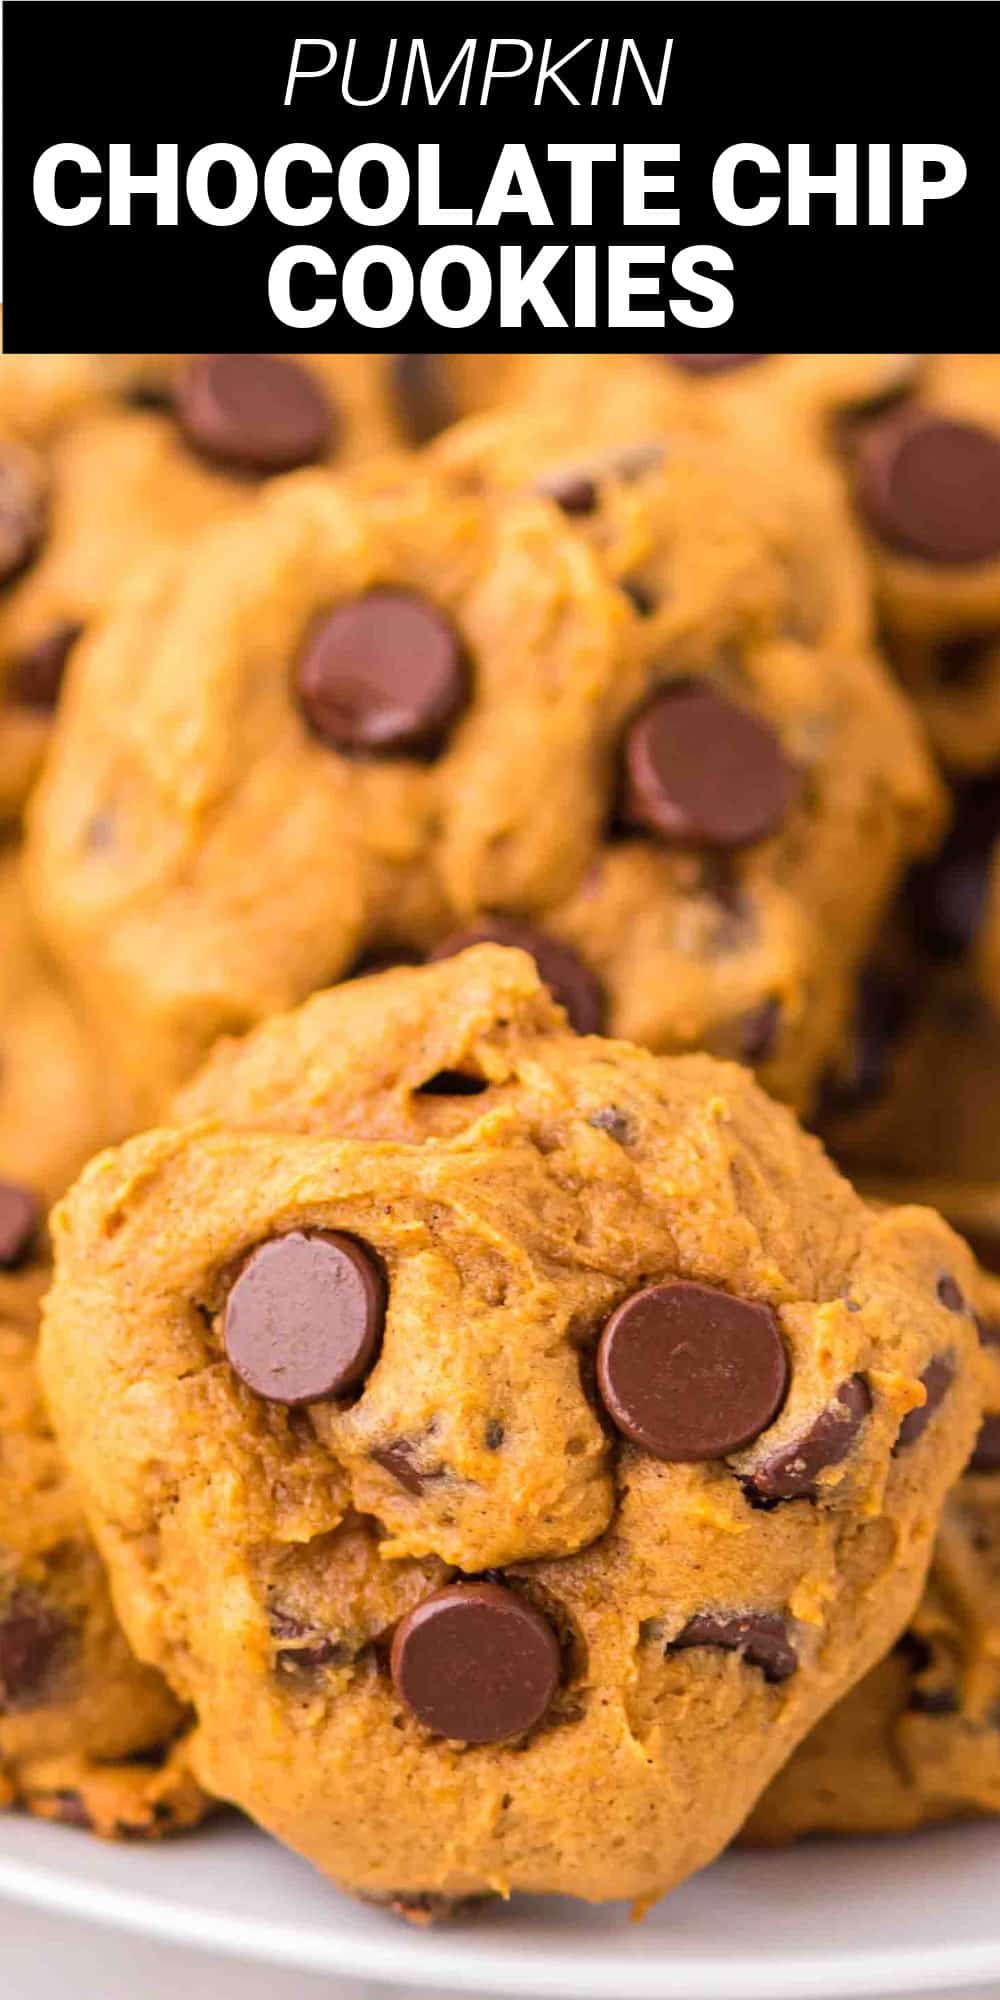 If you’re looking for the very best Pumpkin Chocolate Chip Cookies, look no further! These cookies so are soft, delightfully chewy, full of amazing pumpkin flavor and melted chocolate chips. They're absolutely the perfect pumpkin treats for all your fall gatherings!